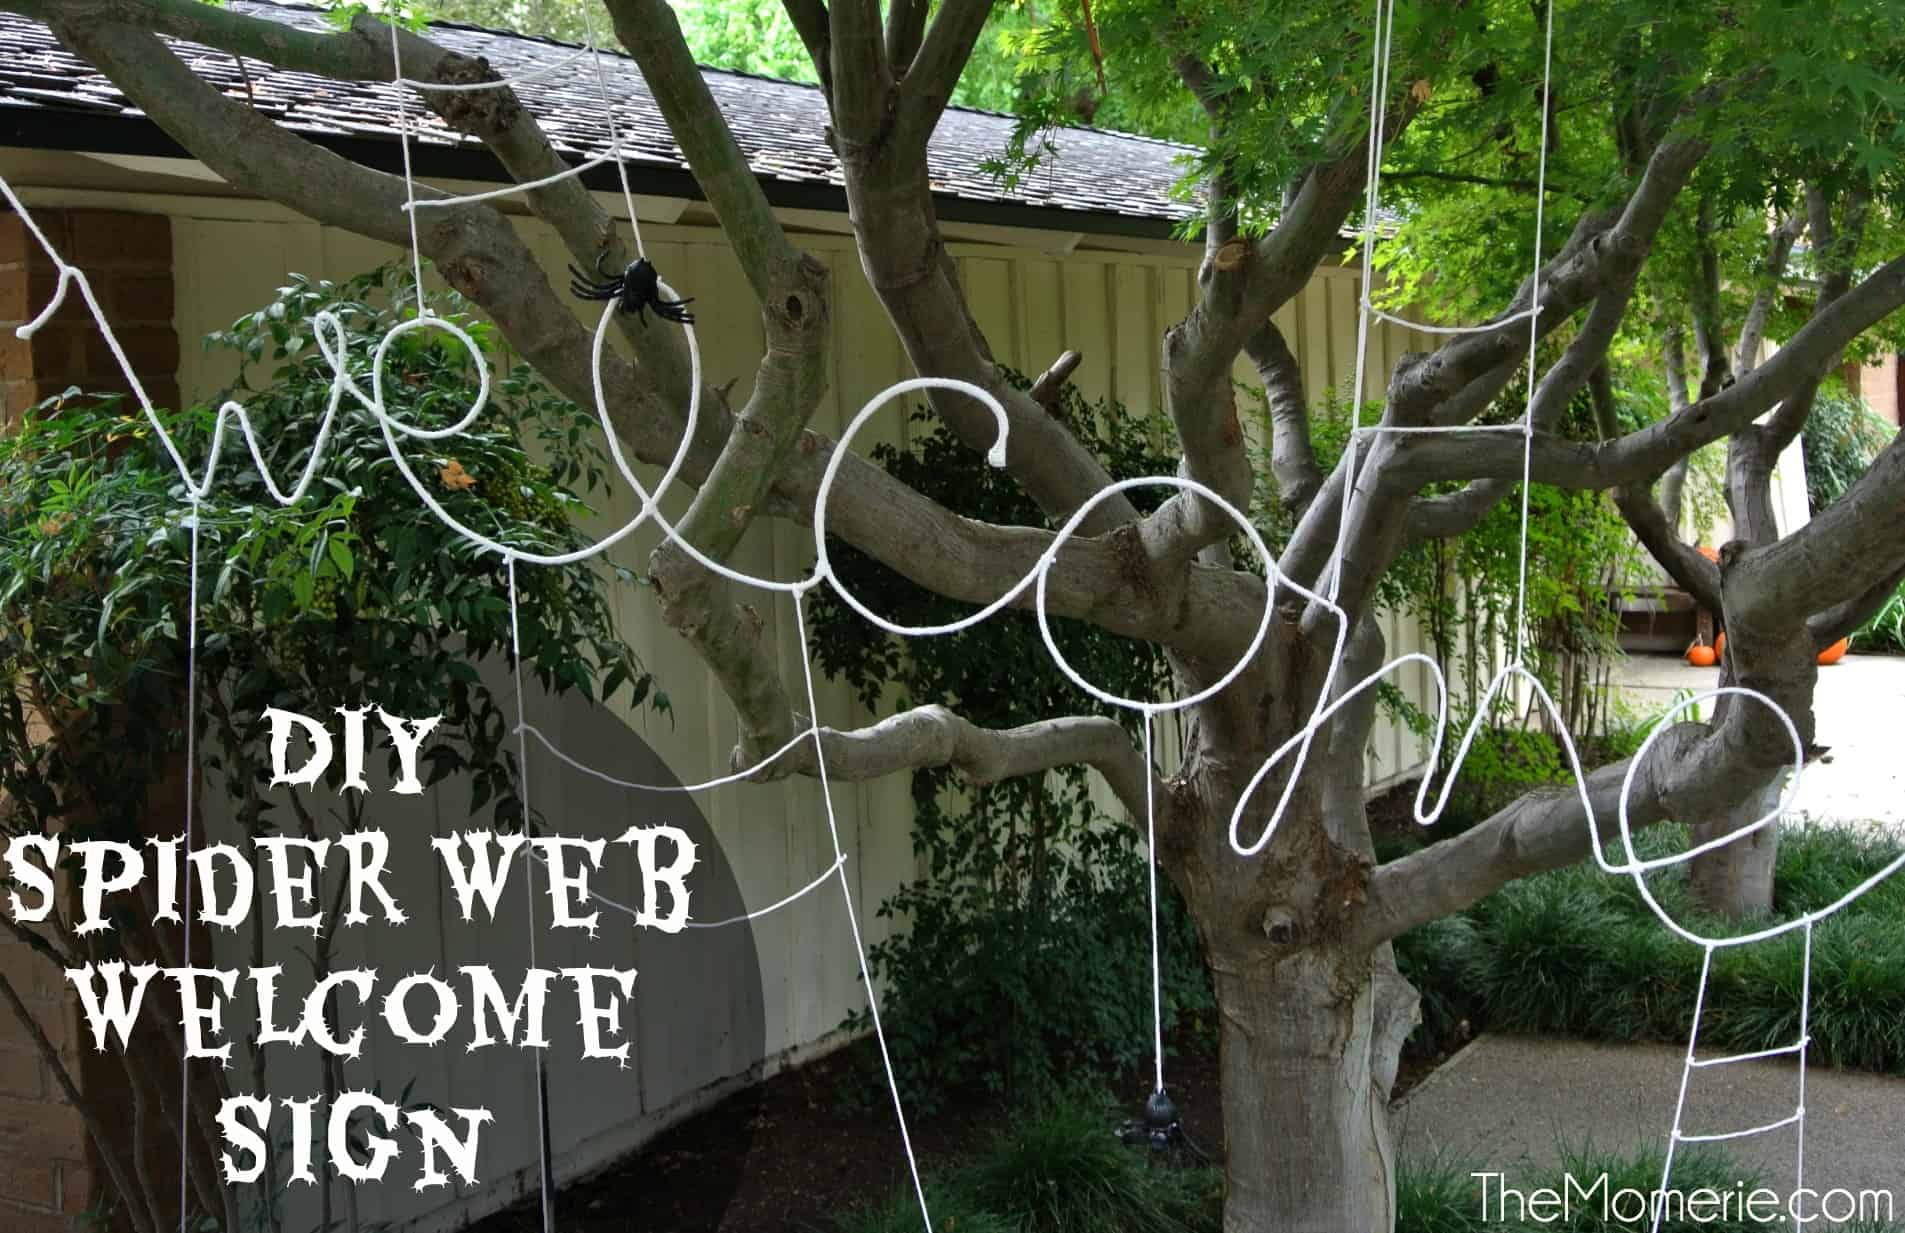 Spider web welcome sign